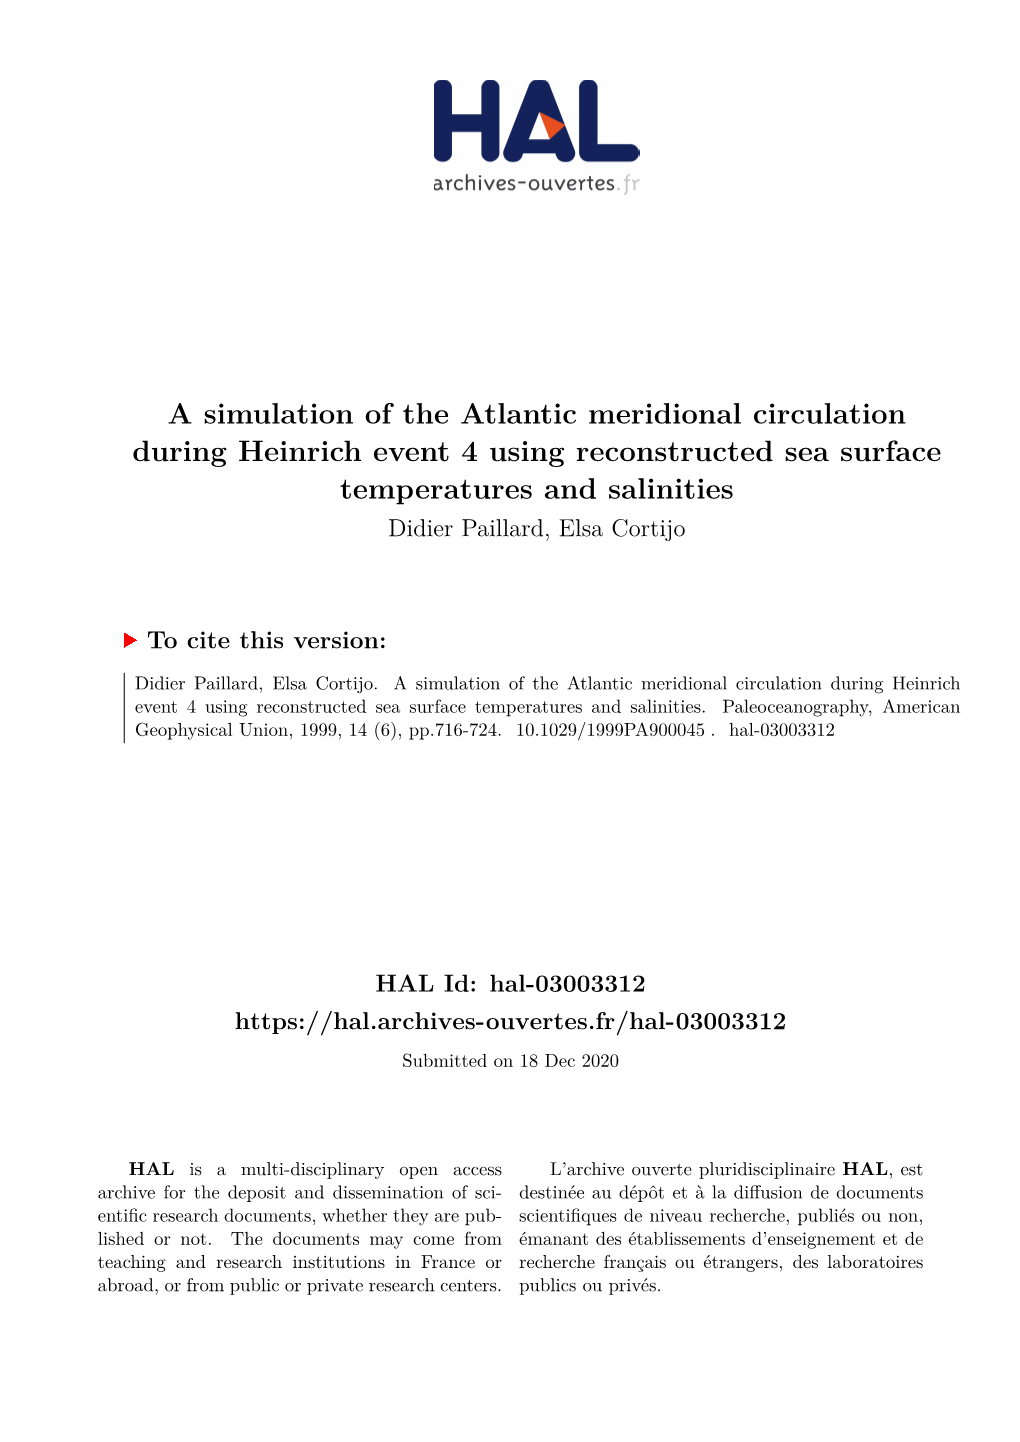 A Simulation of the Atlantic Meridional Circulation During Heinrich Event 4 Using Reconstructed Sea Surface Temperatures and Salinities Didier Paillard, Elsa Cortijo